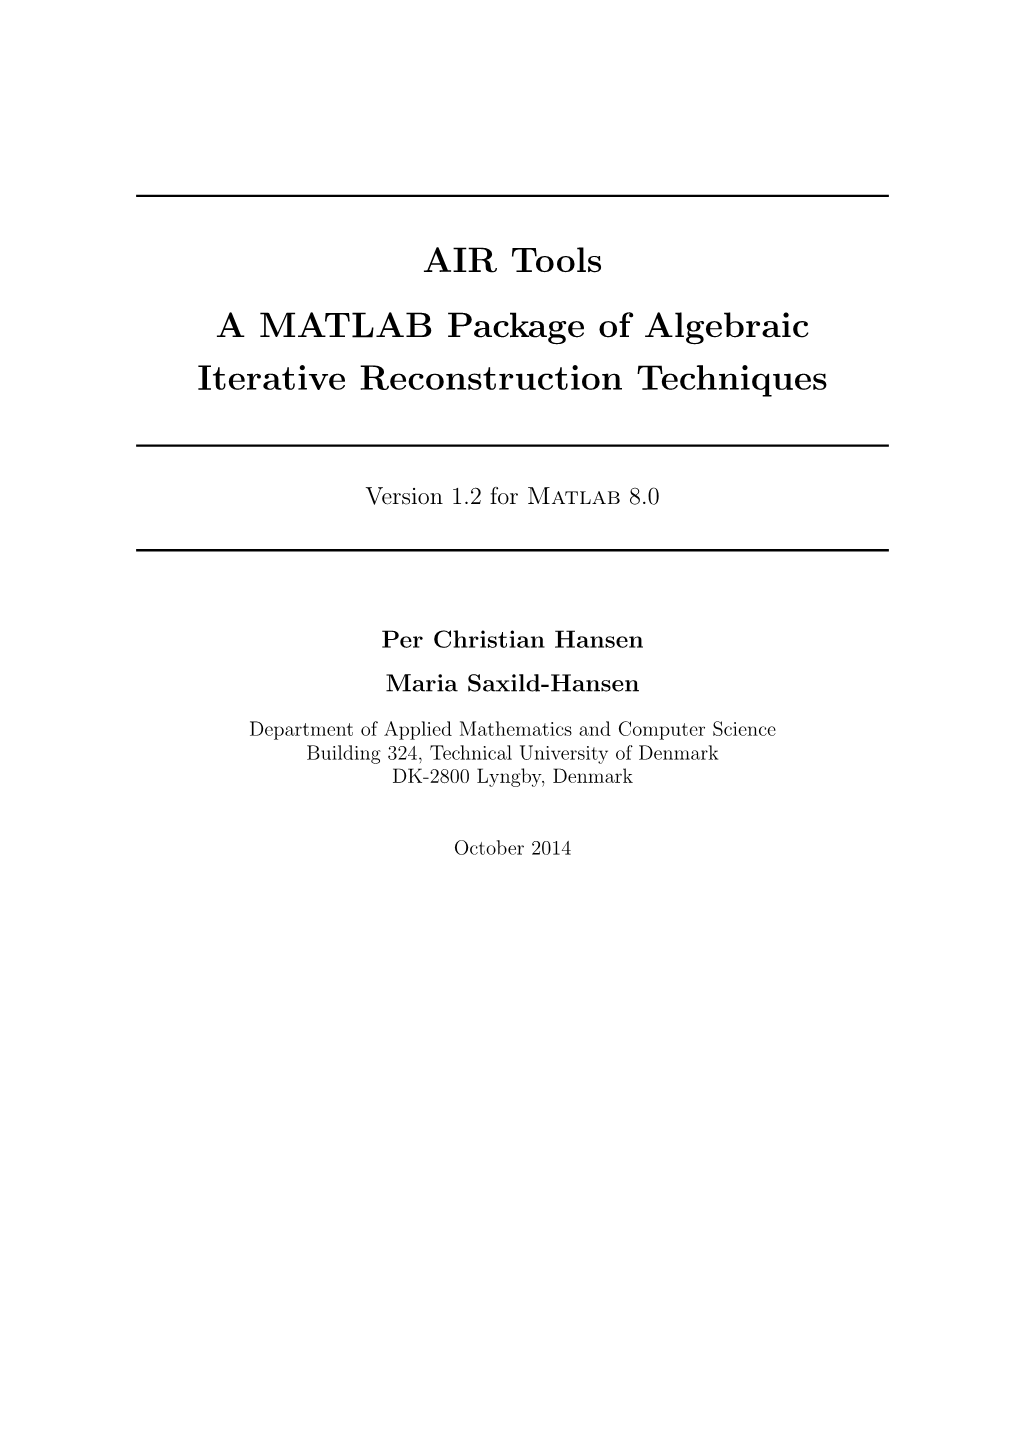 AIR Tools a MATLAB Package of Algebraic Iterative Reconstruction Techniques